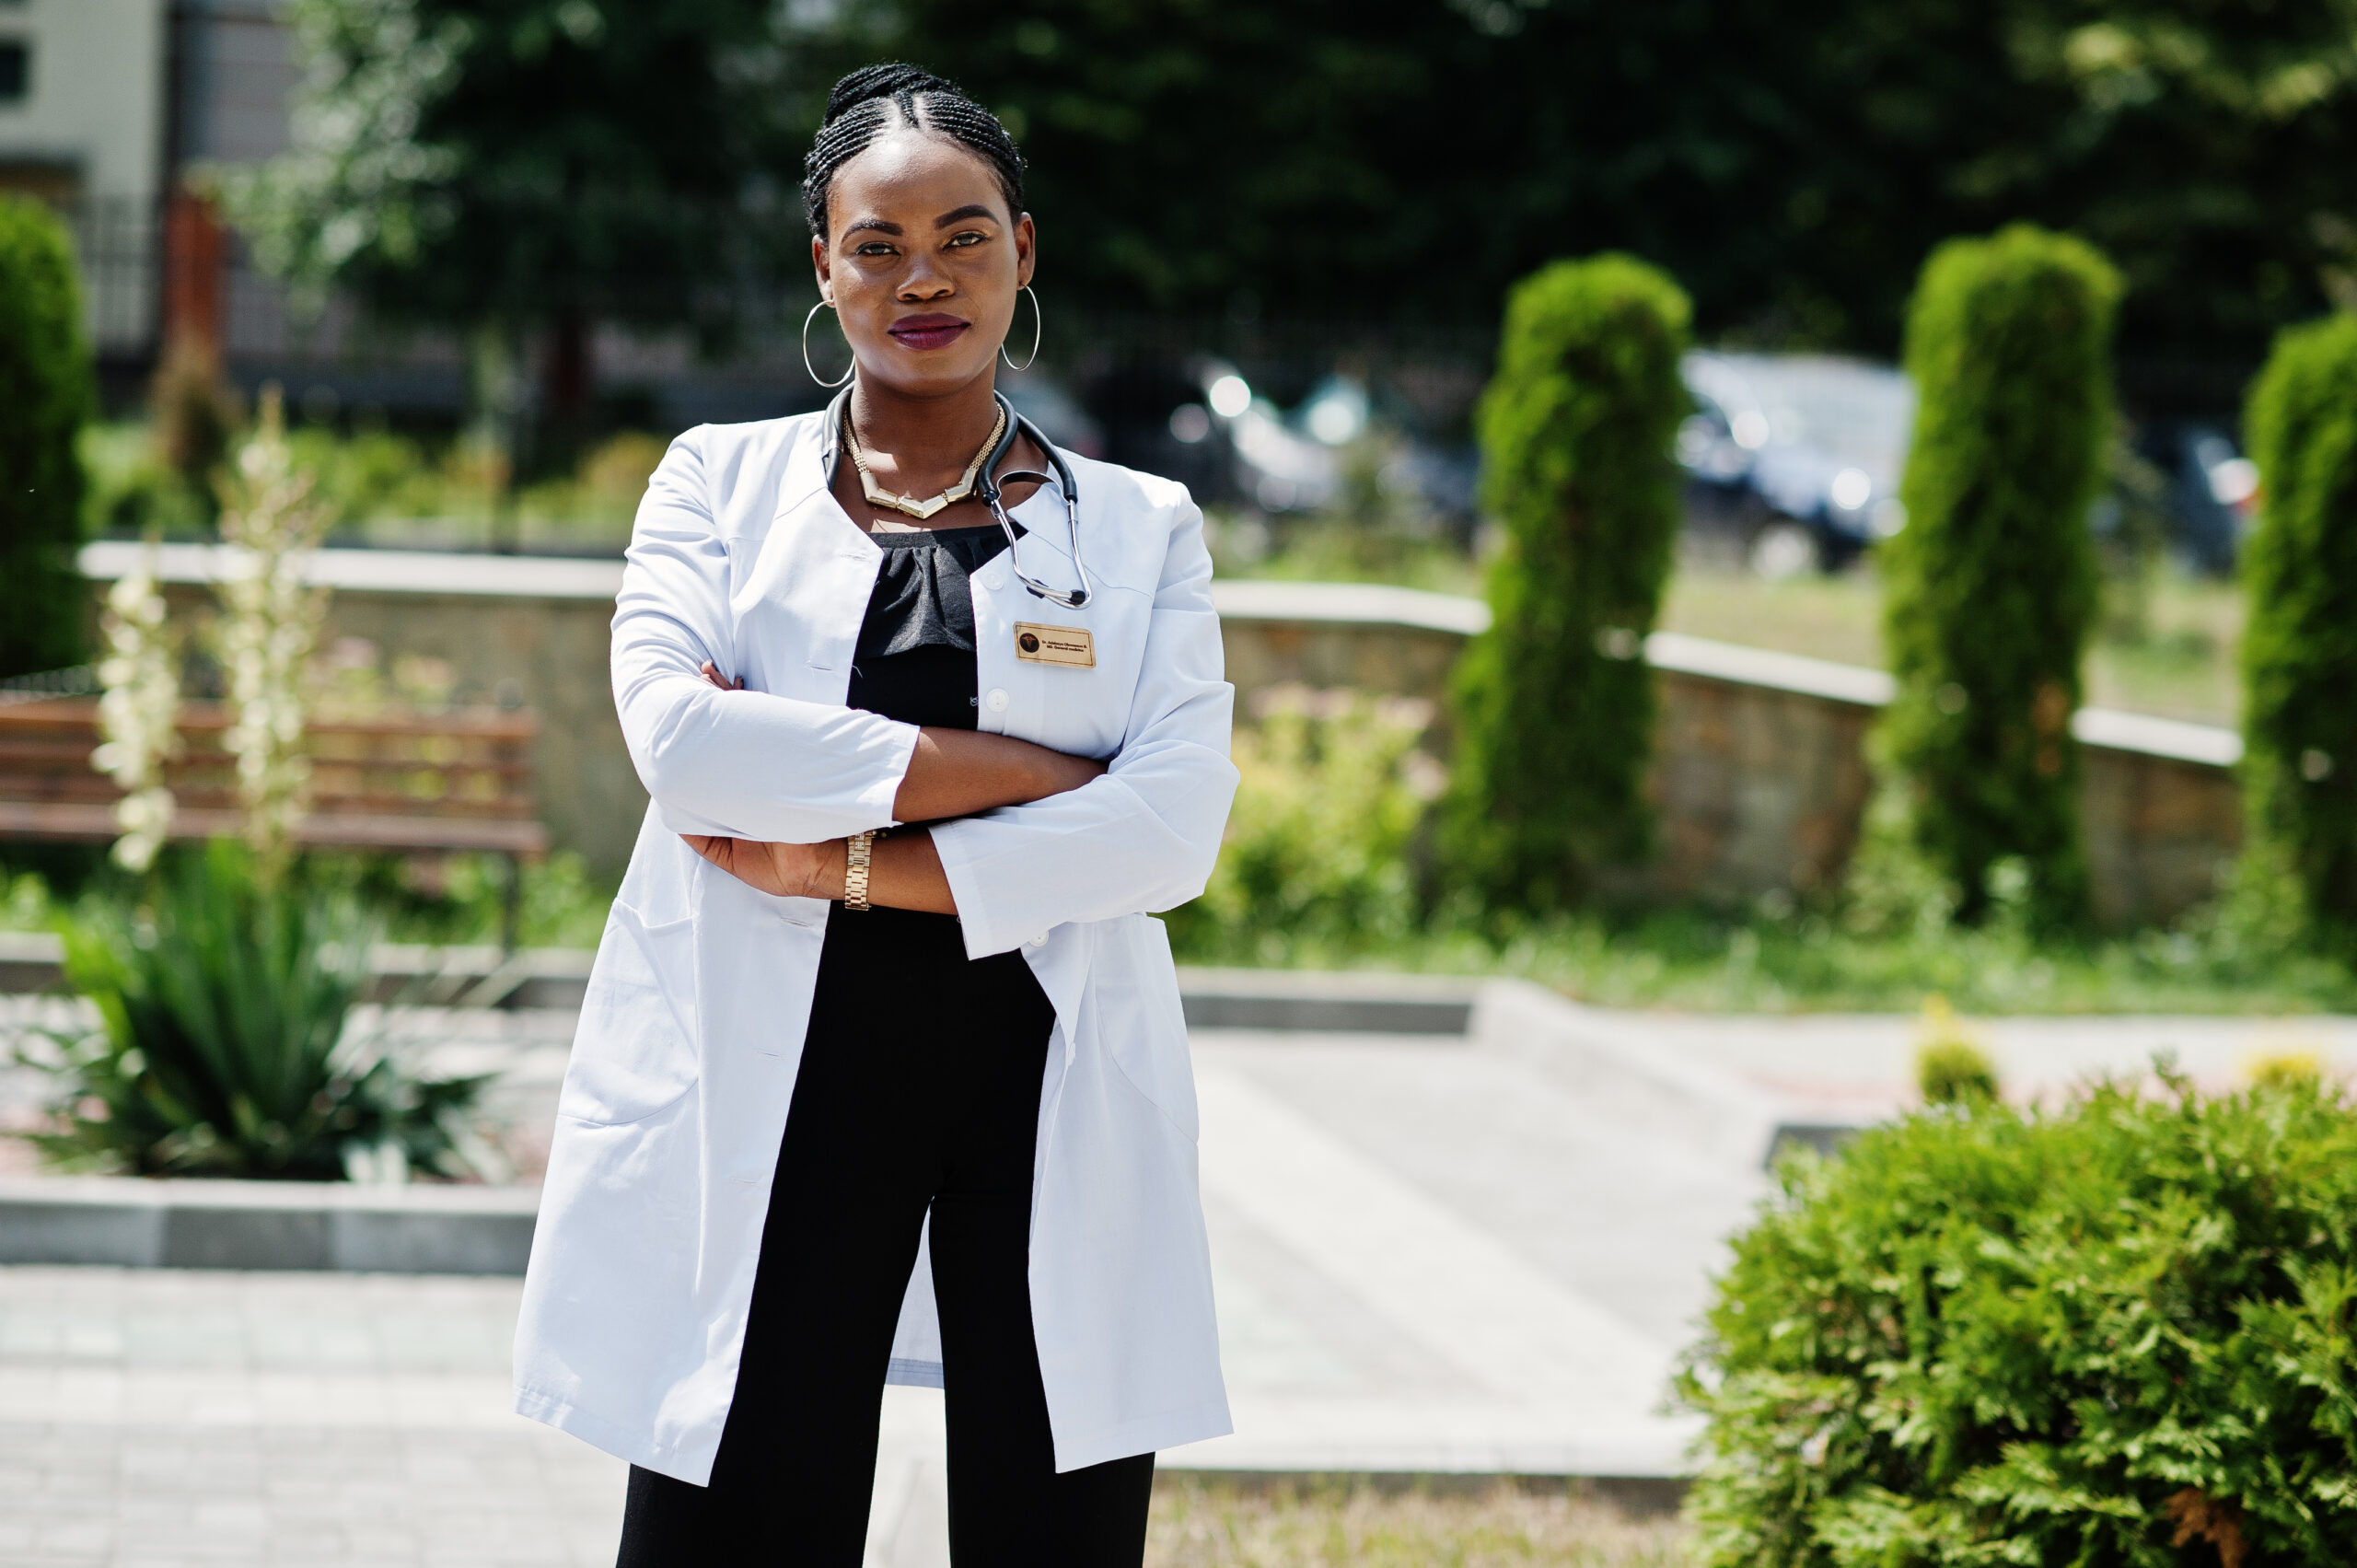 African american doctor female at lab coat with stethoscope outdoor.